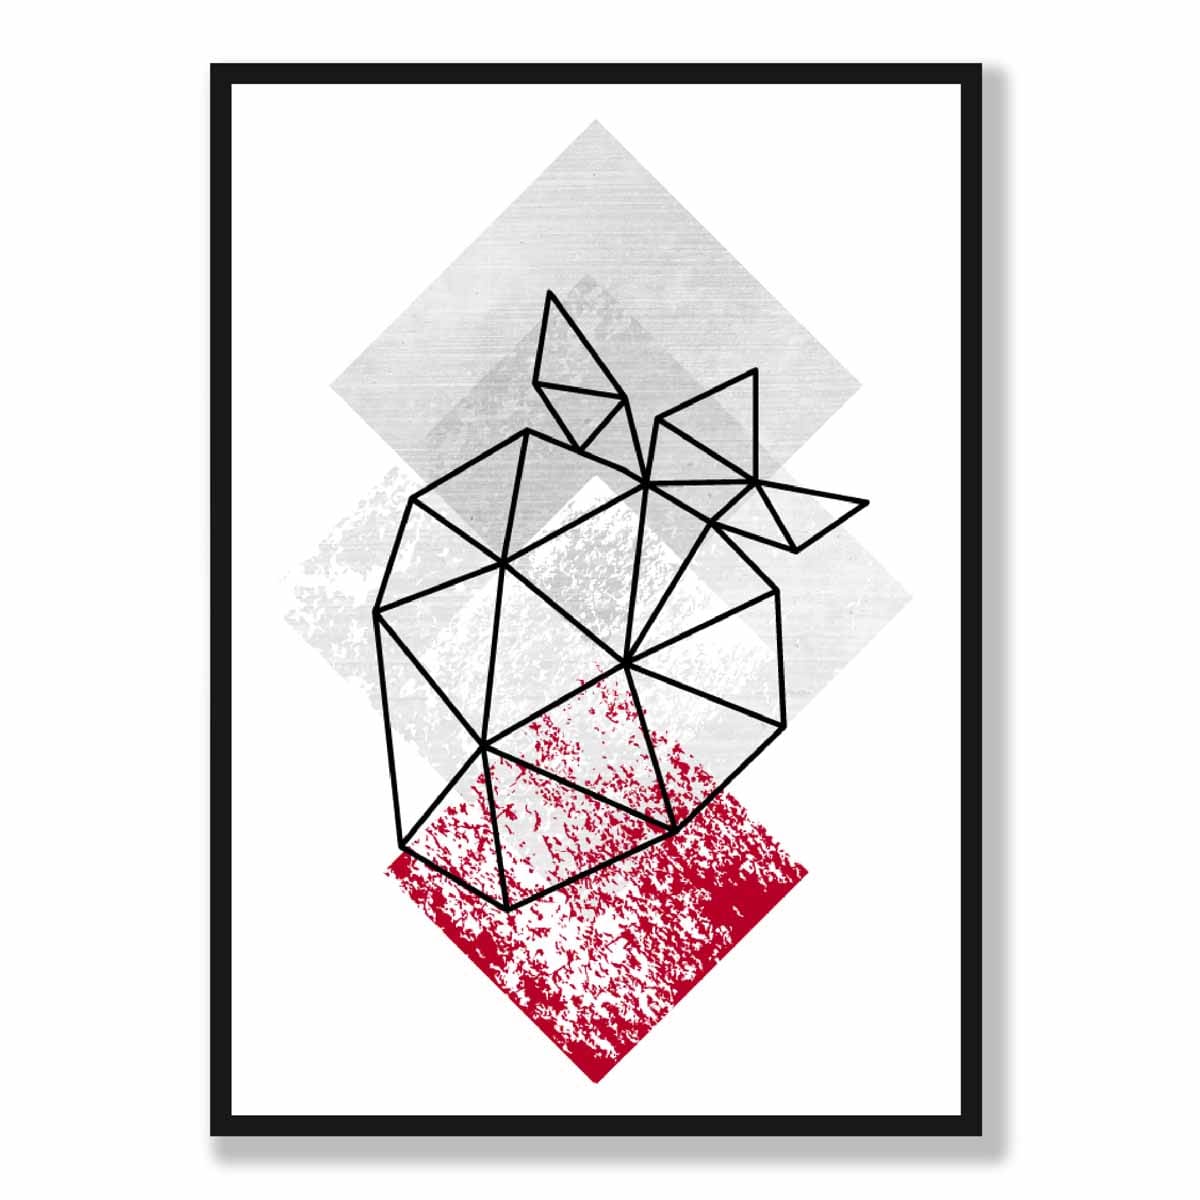 Geometric Fruit Line art Poster of Strawberry in Red & Grey